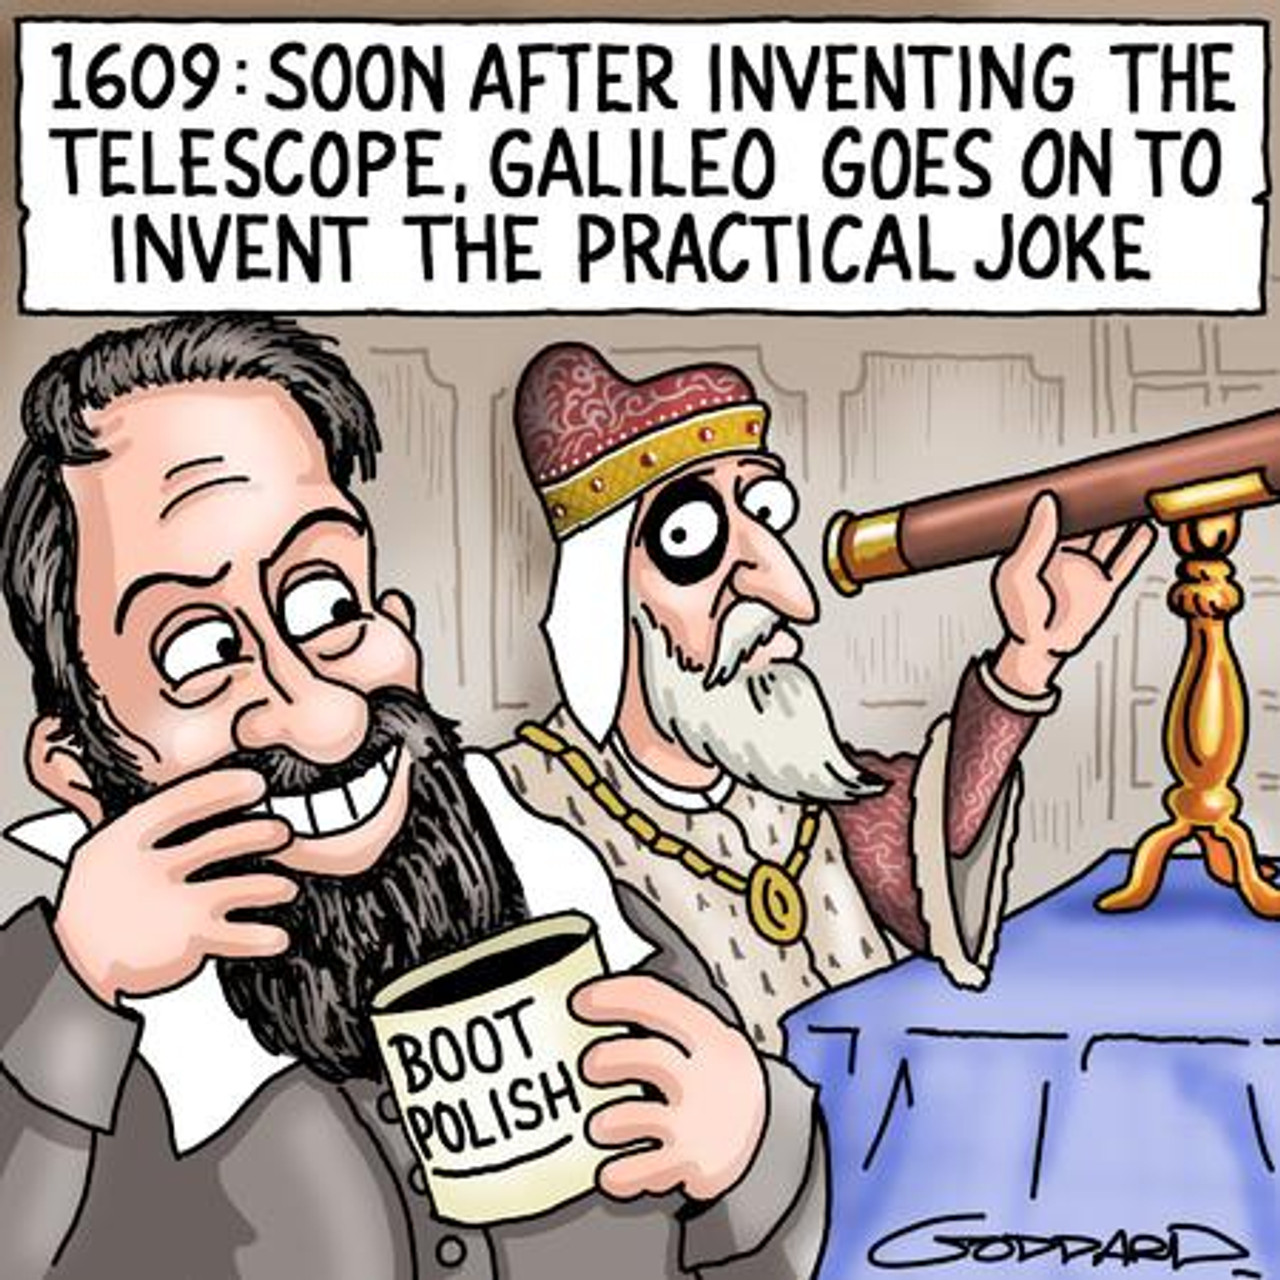 30374046-Clive Goddard - Sunday Sun 1609: Soon after inventing the  telescope Galileo goes on to invent the practical joke - The Times |  Newsprints